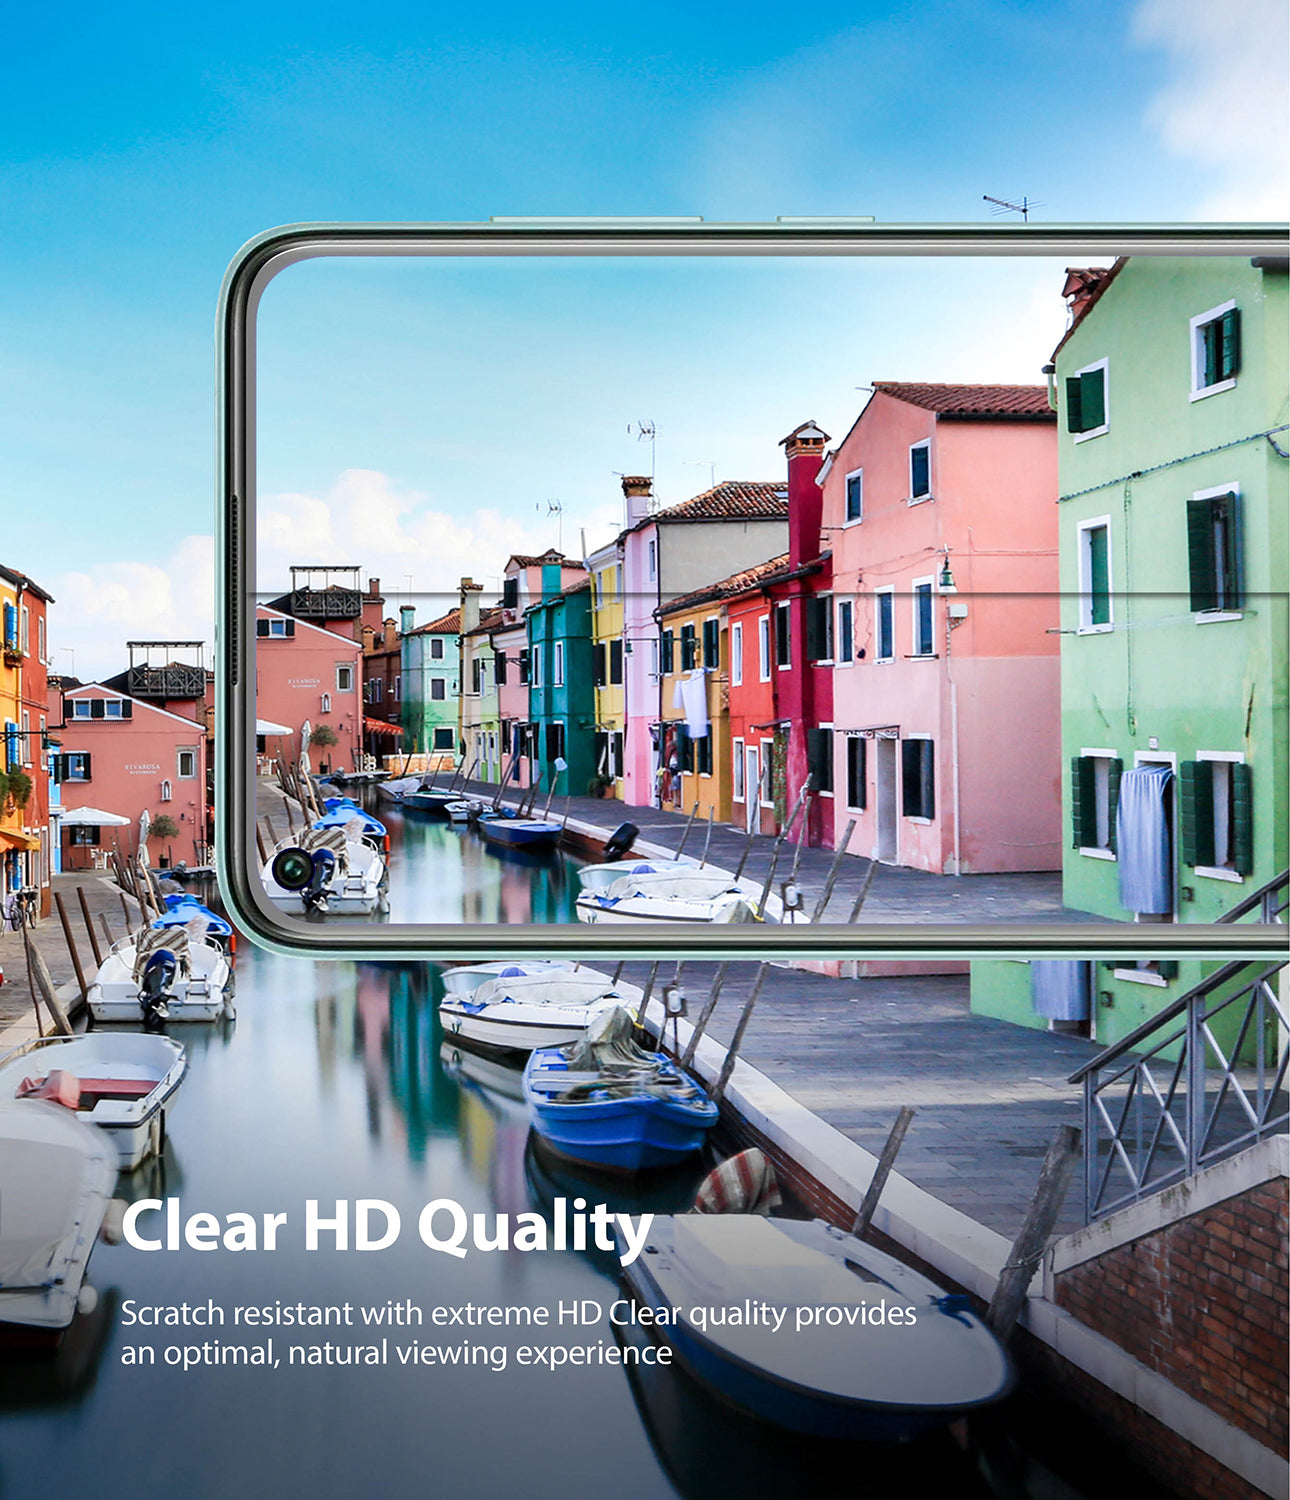 scratch resistant with extreme HD clear quality provides an optimal, natural viewing experience